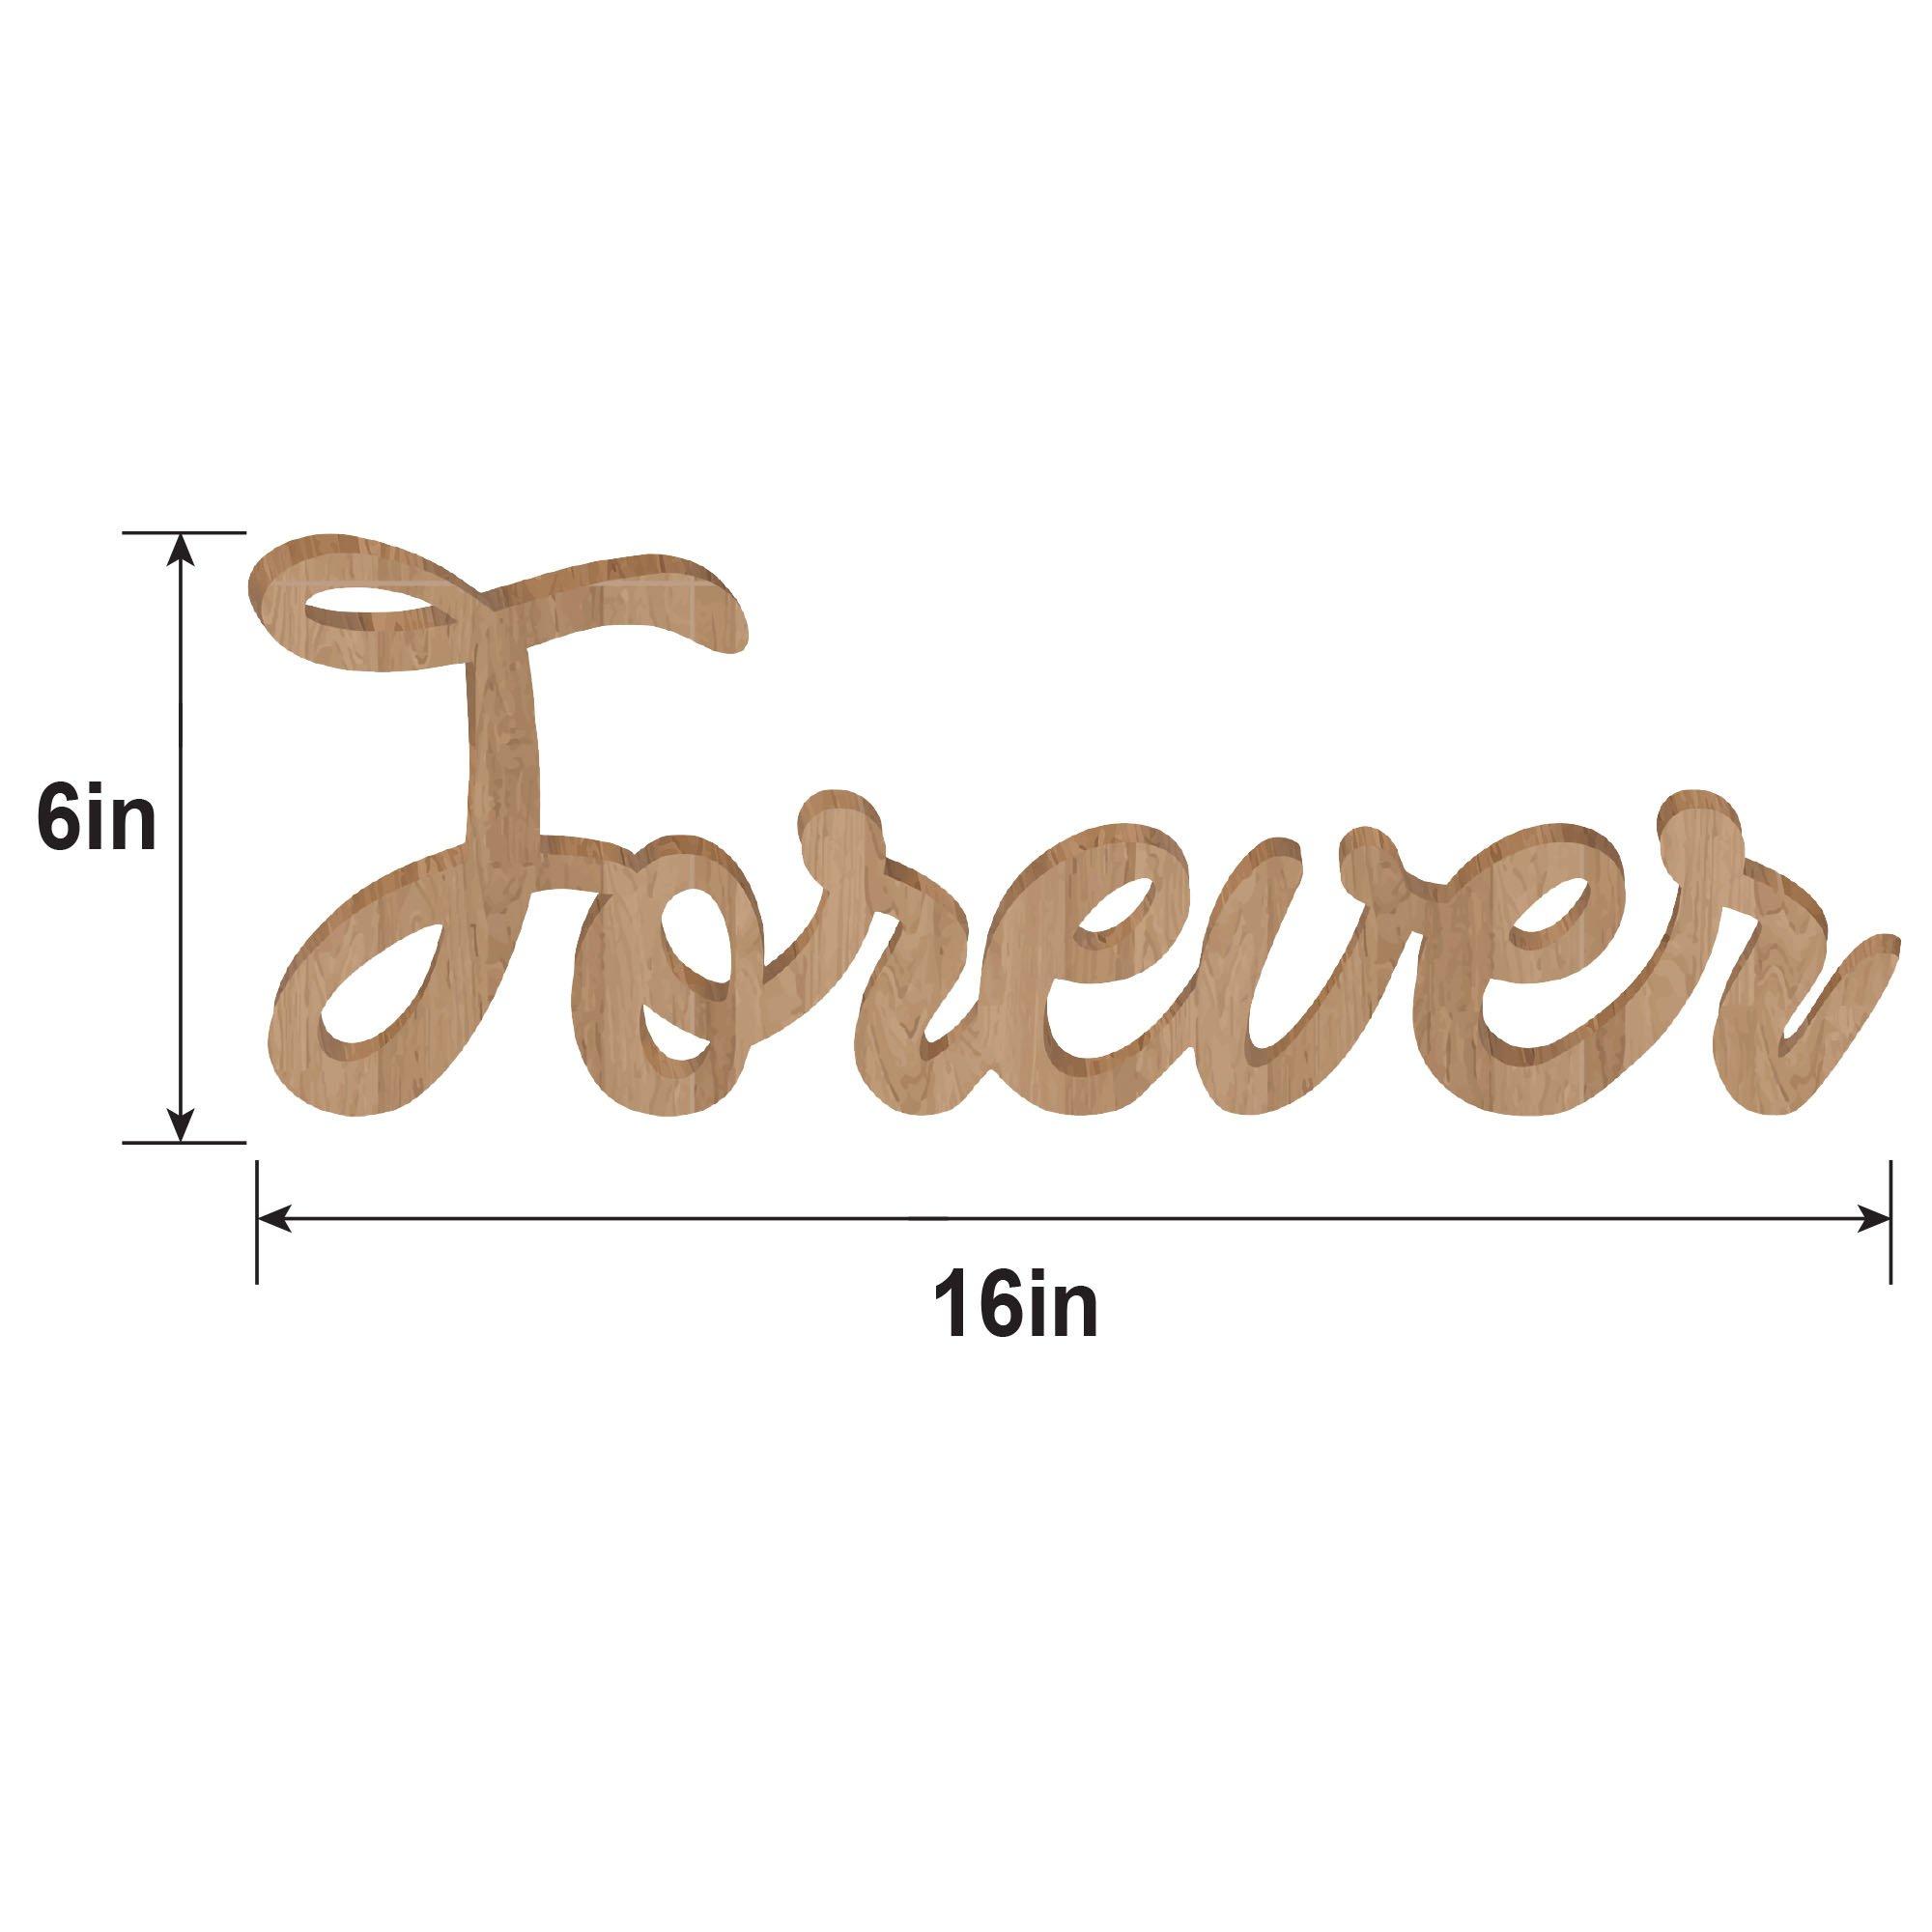 Forever Wood Standing Sign, 16in x 6in